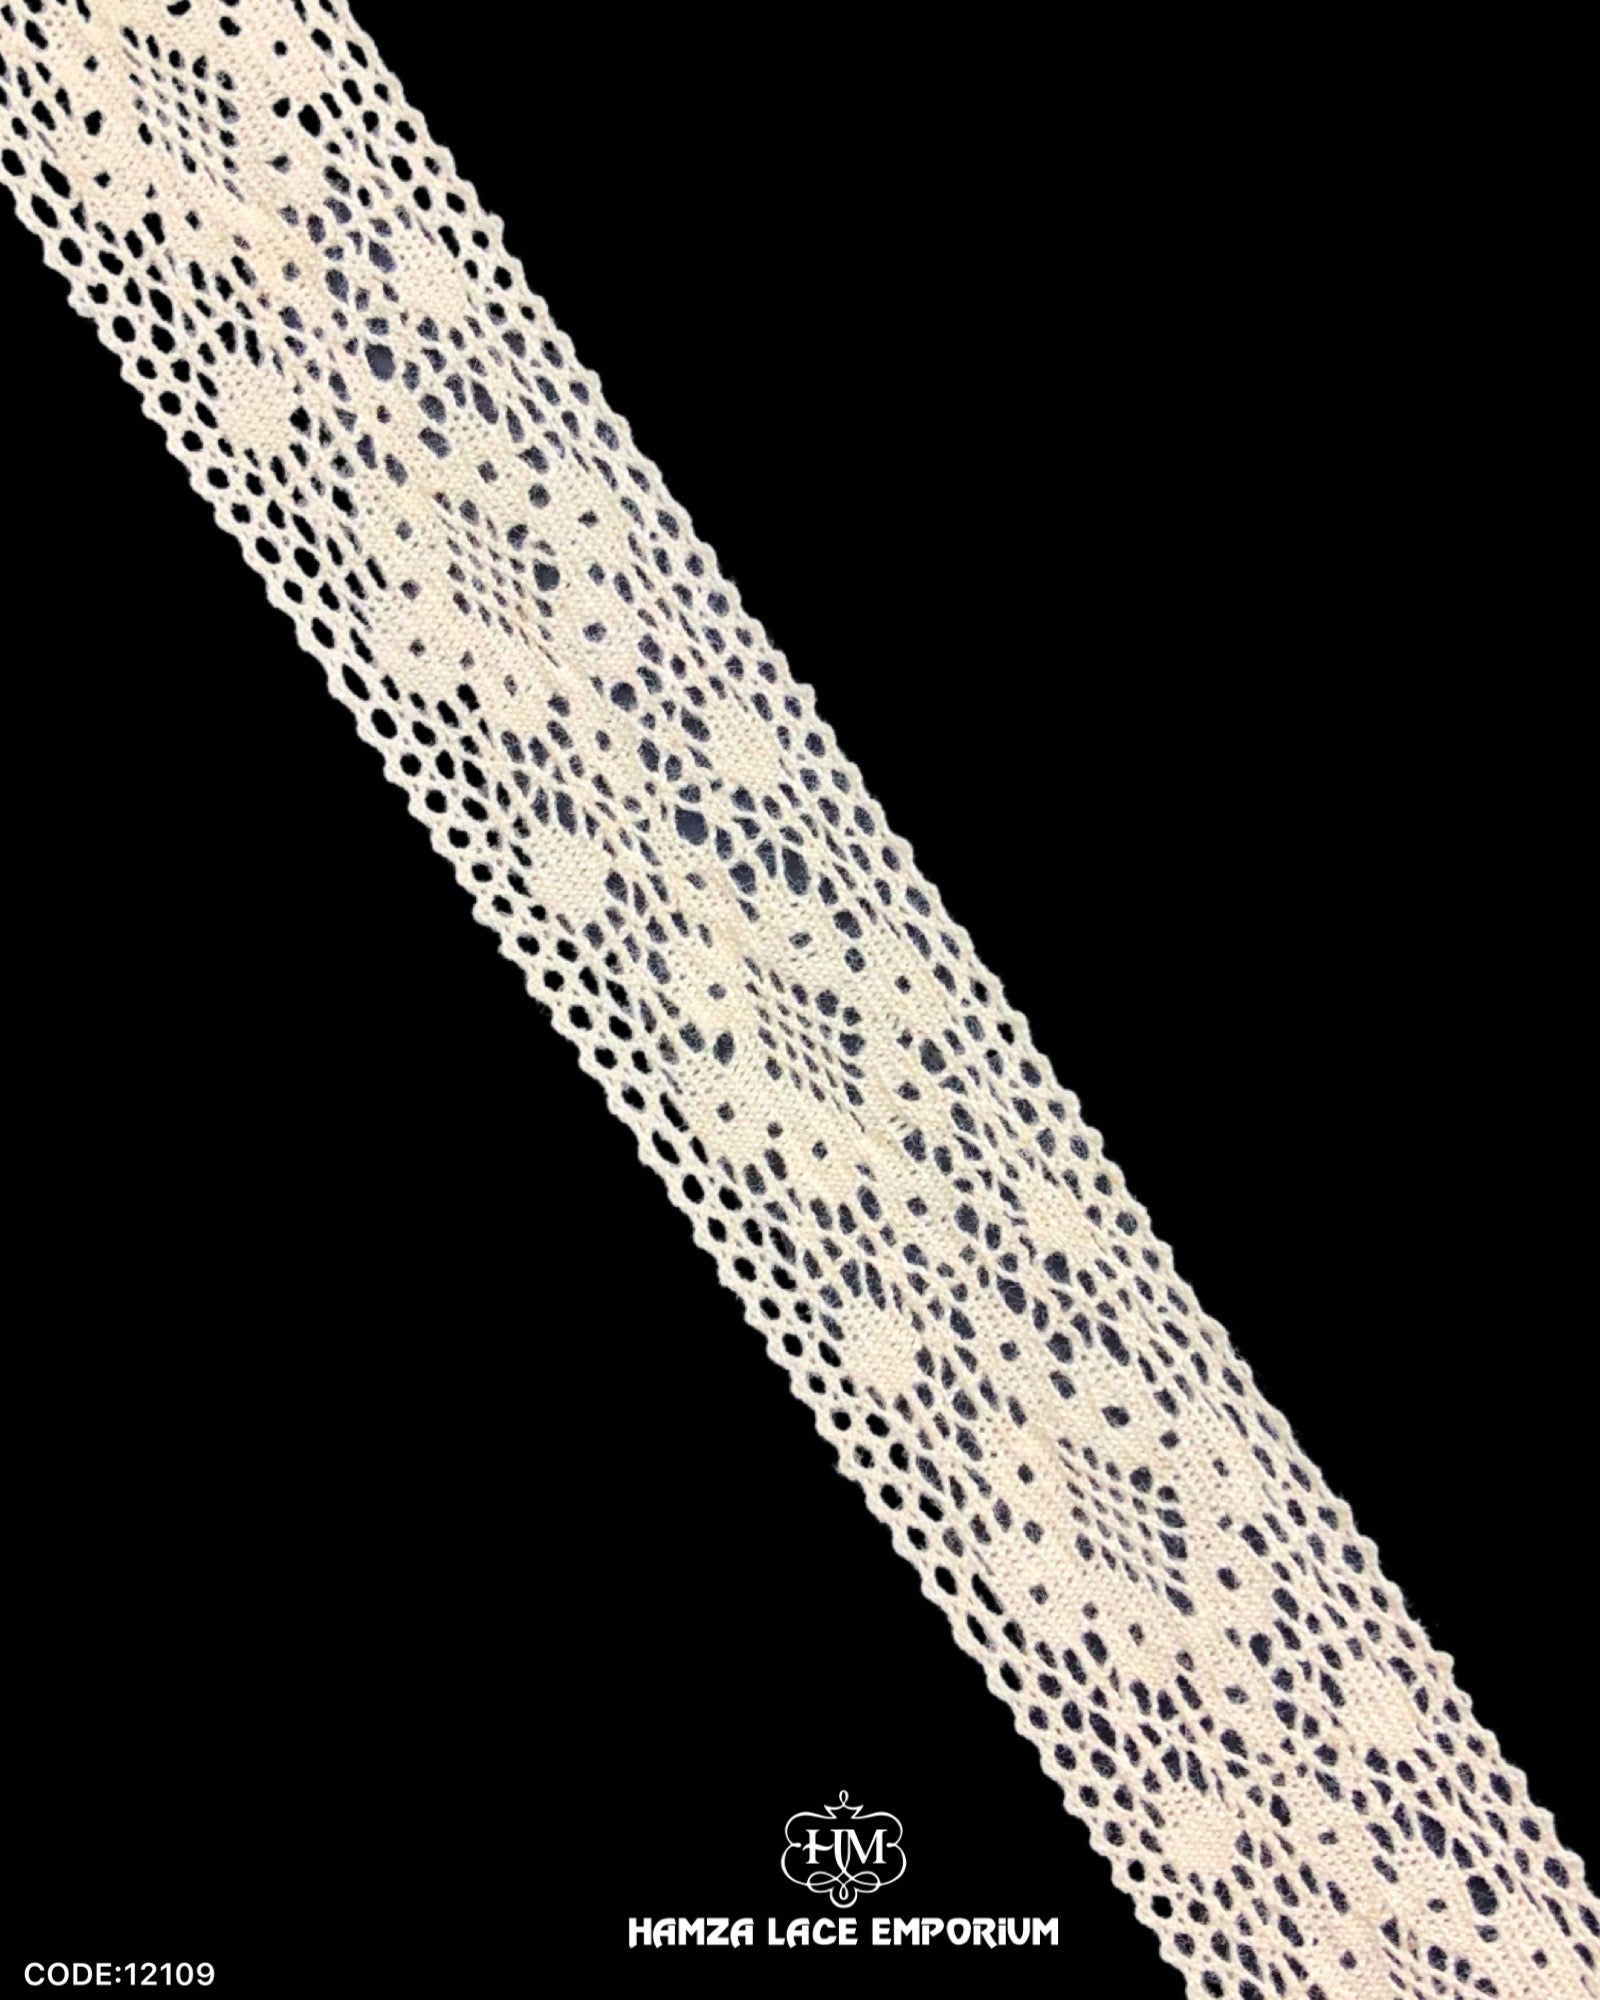 'Center Filling Crochet Lace 12109' with the name 'Hamza Lace' written at the bottom